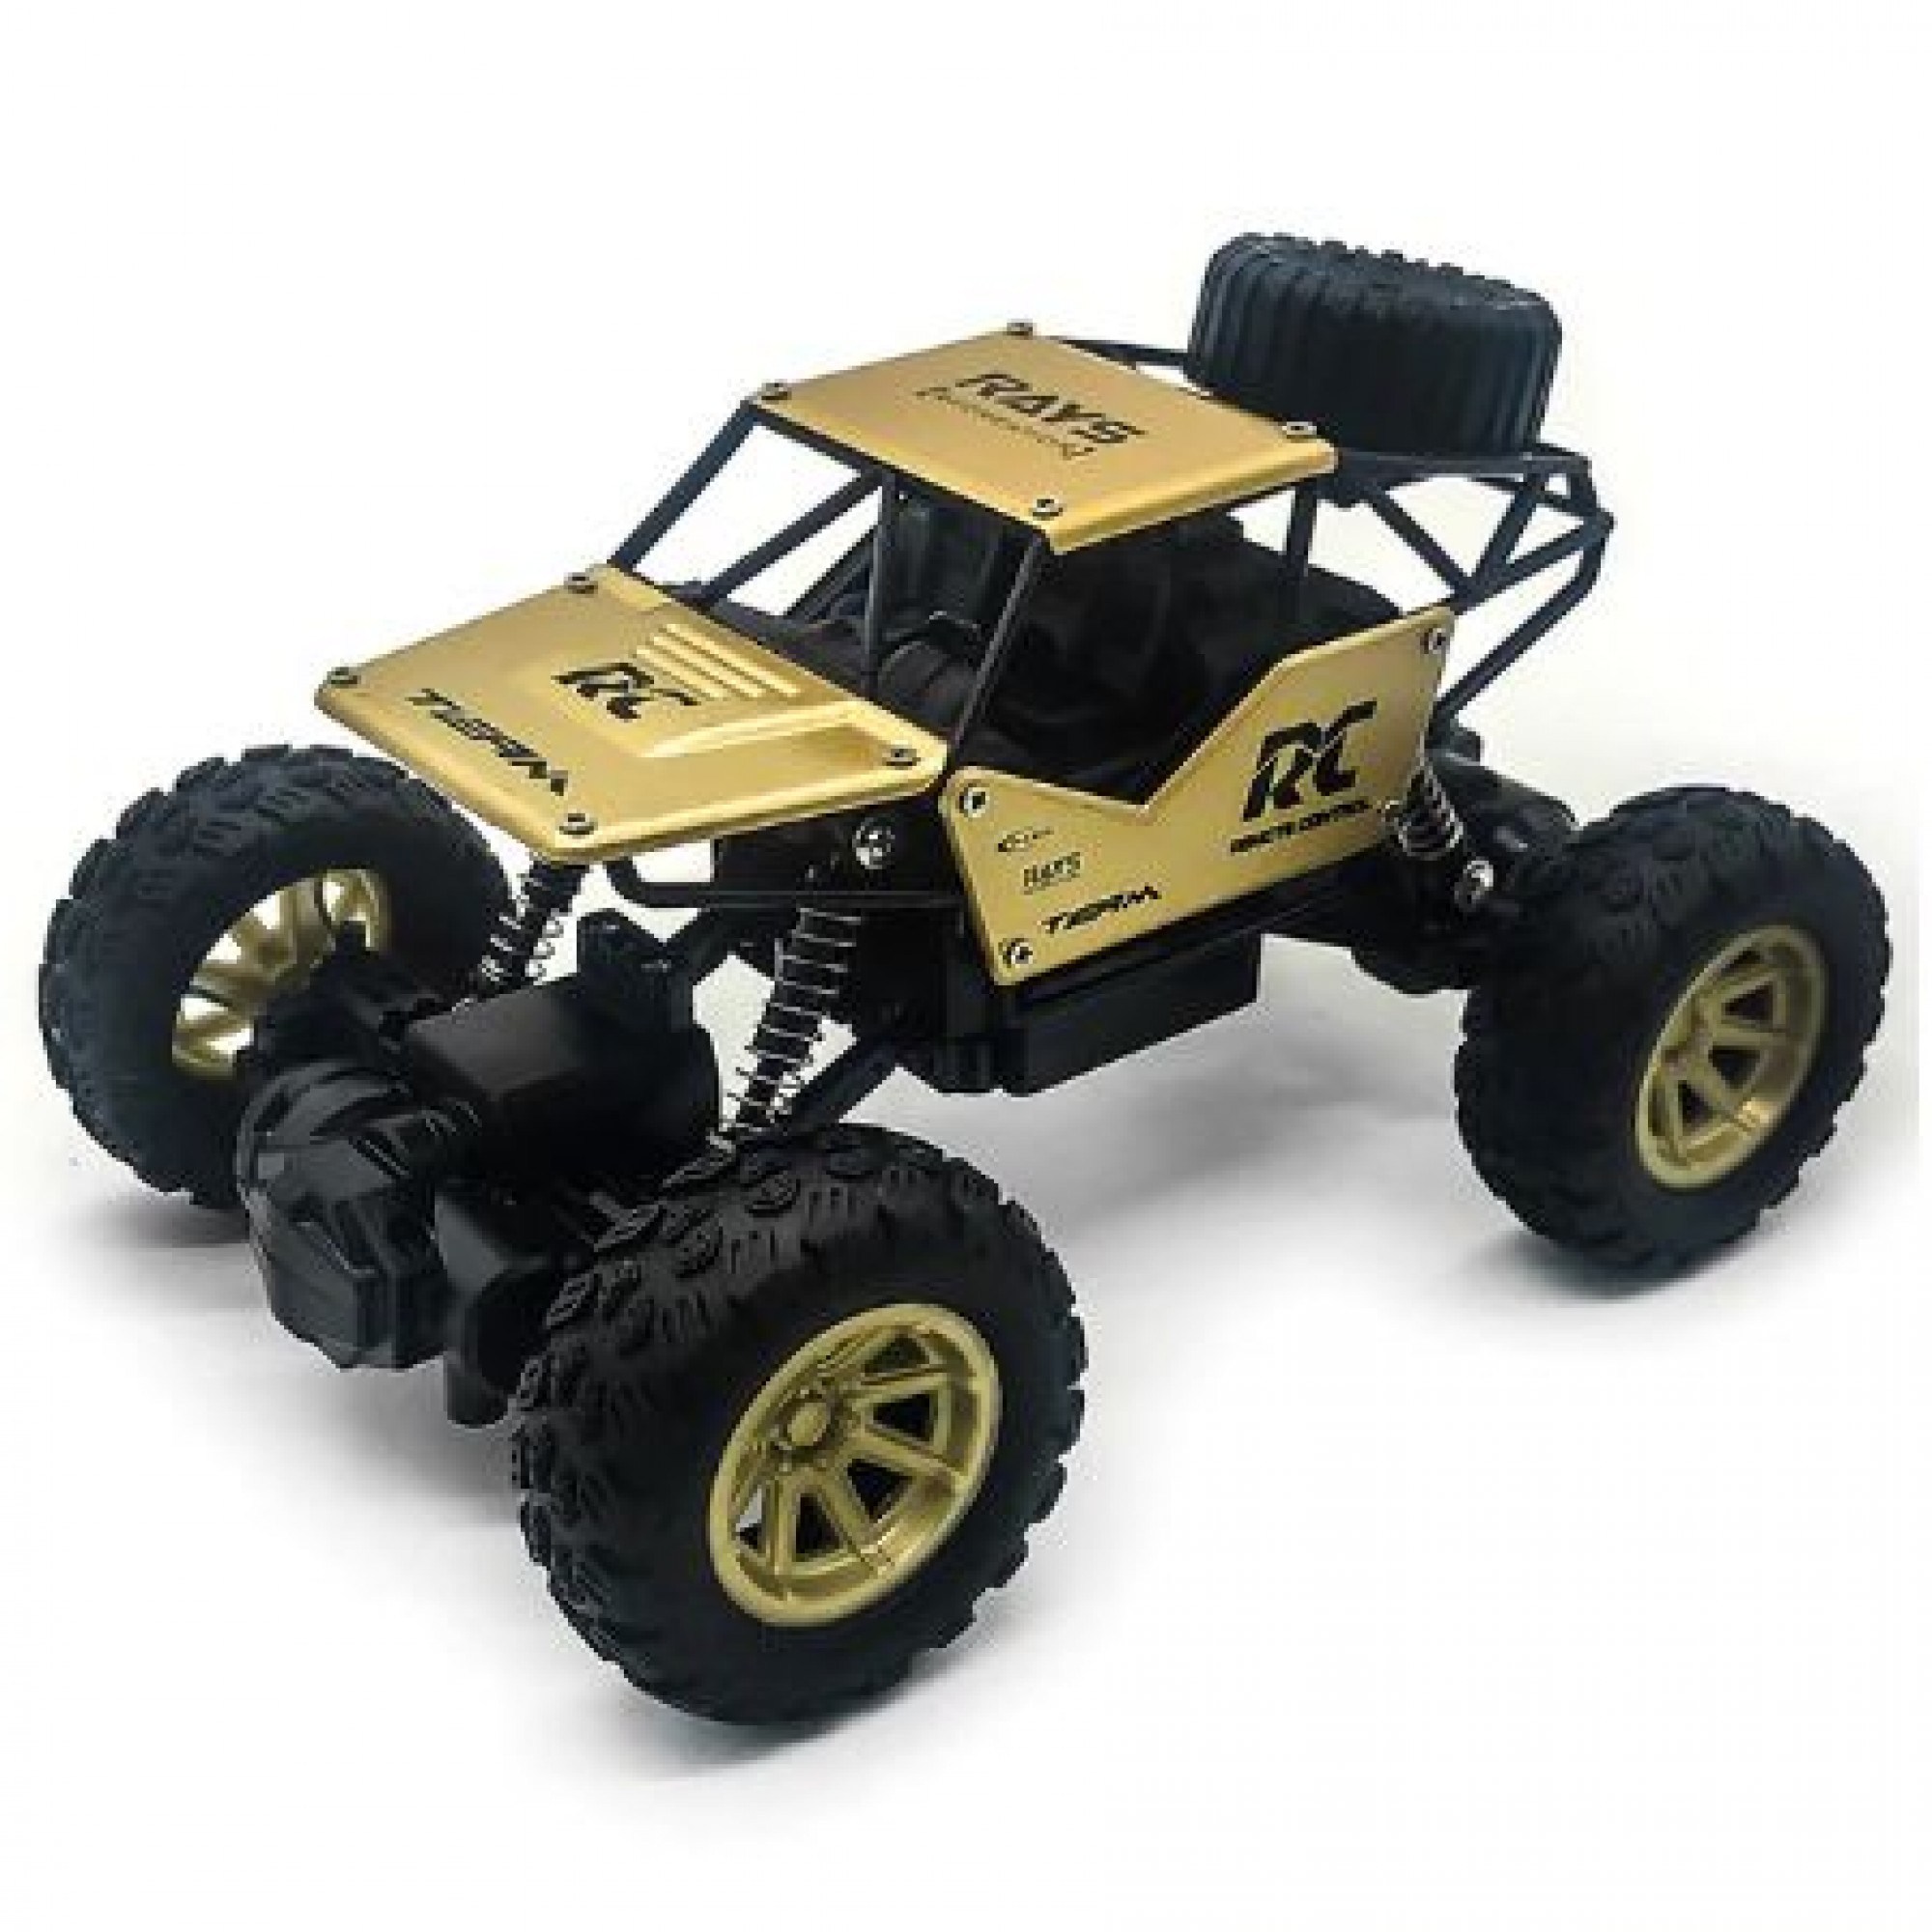 4wd Electric Rc Car 2019 Rock Crawler Remote Control Toy Cars On The